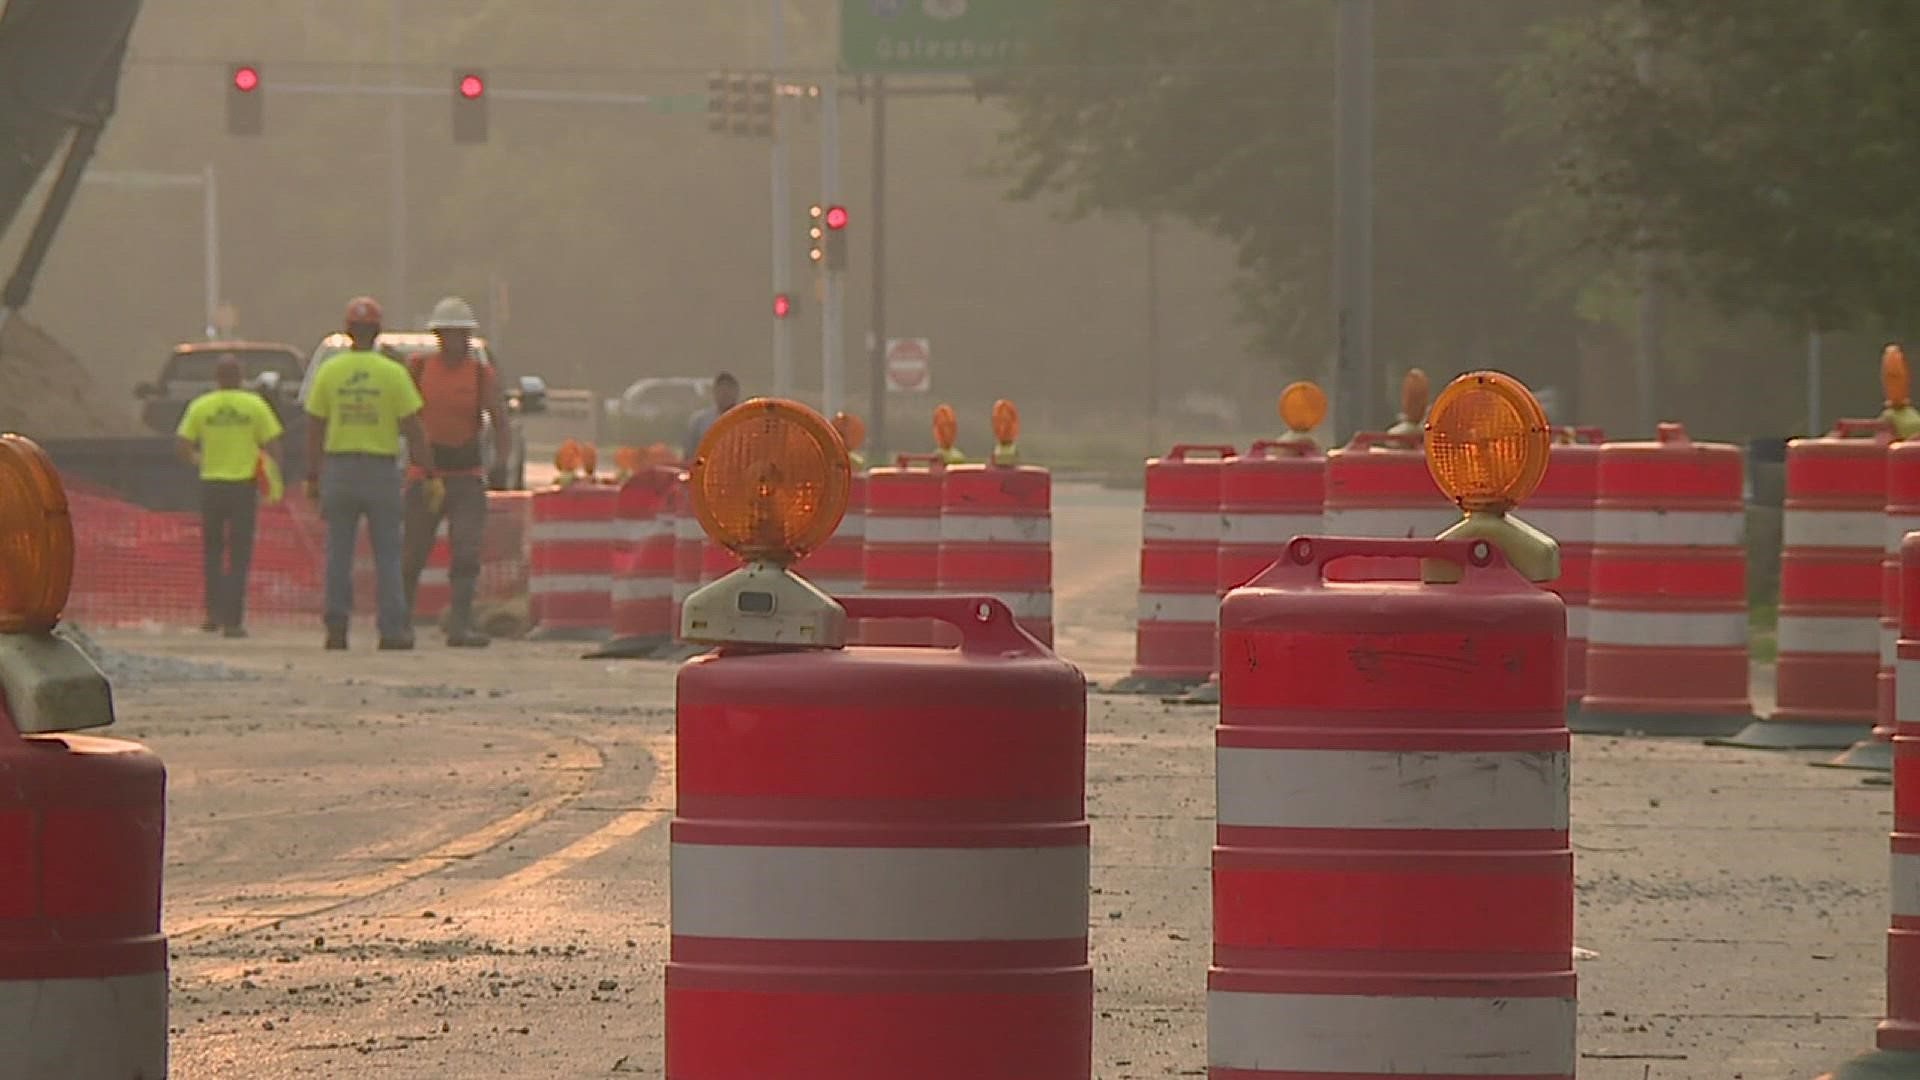 Project leaders said they are waiting for new concrete to reach a certain strength before allowing traffic on the road. They expect that to be around Labor Day.